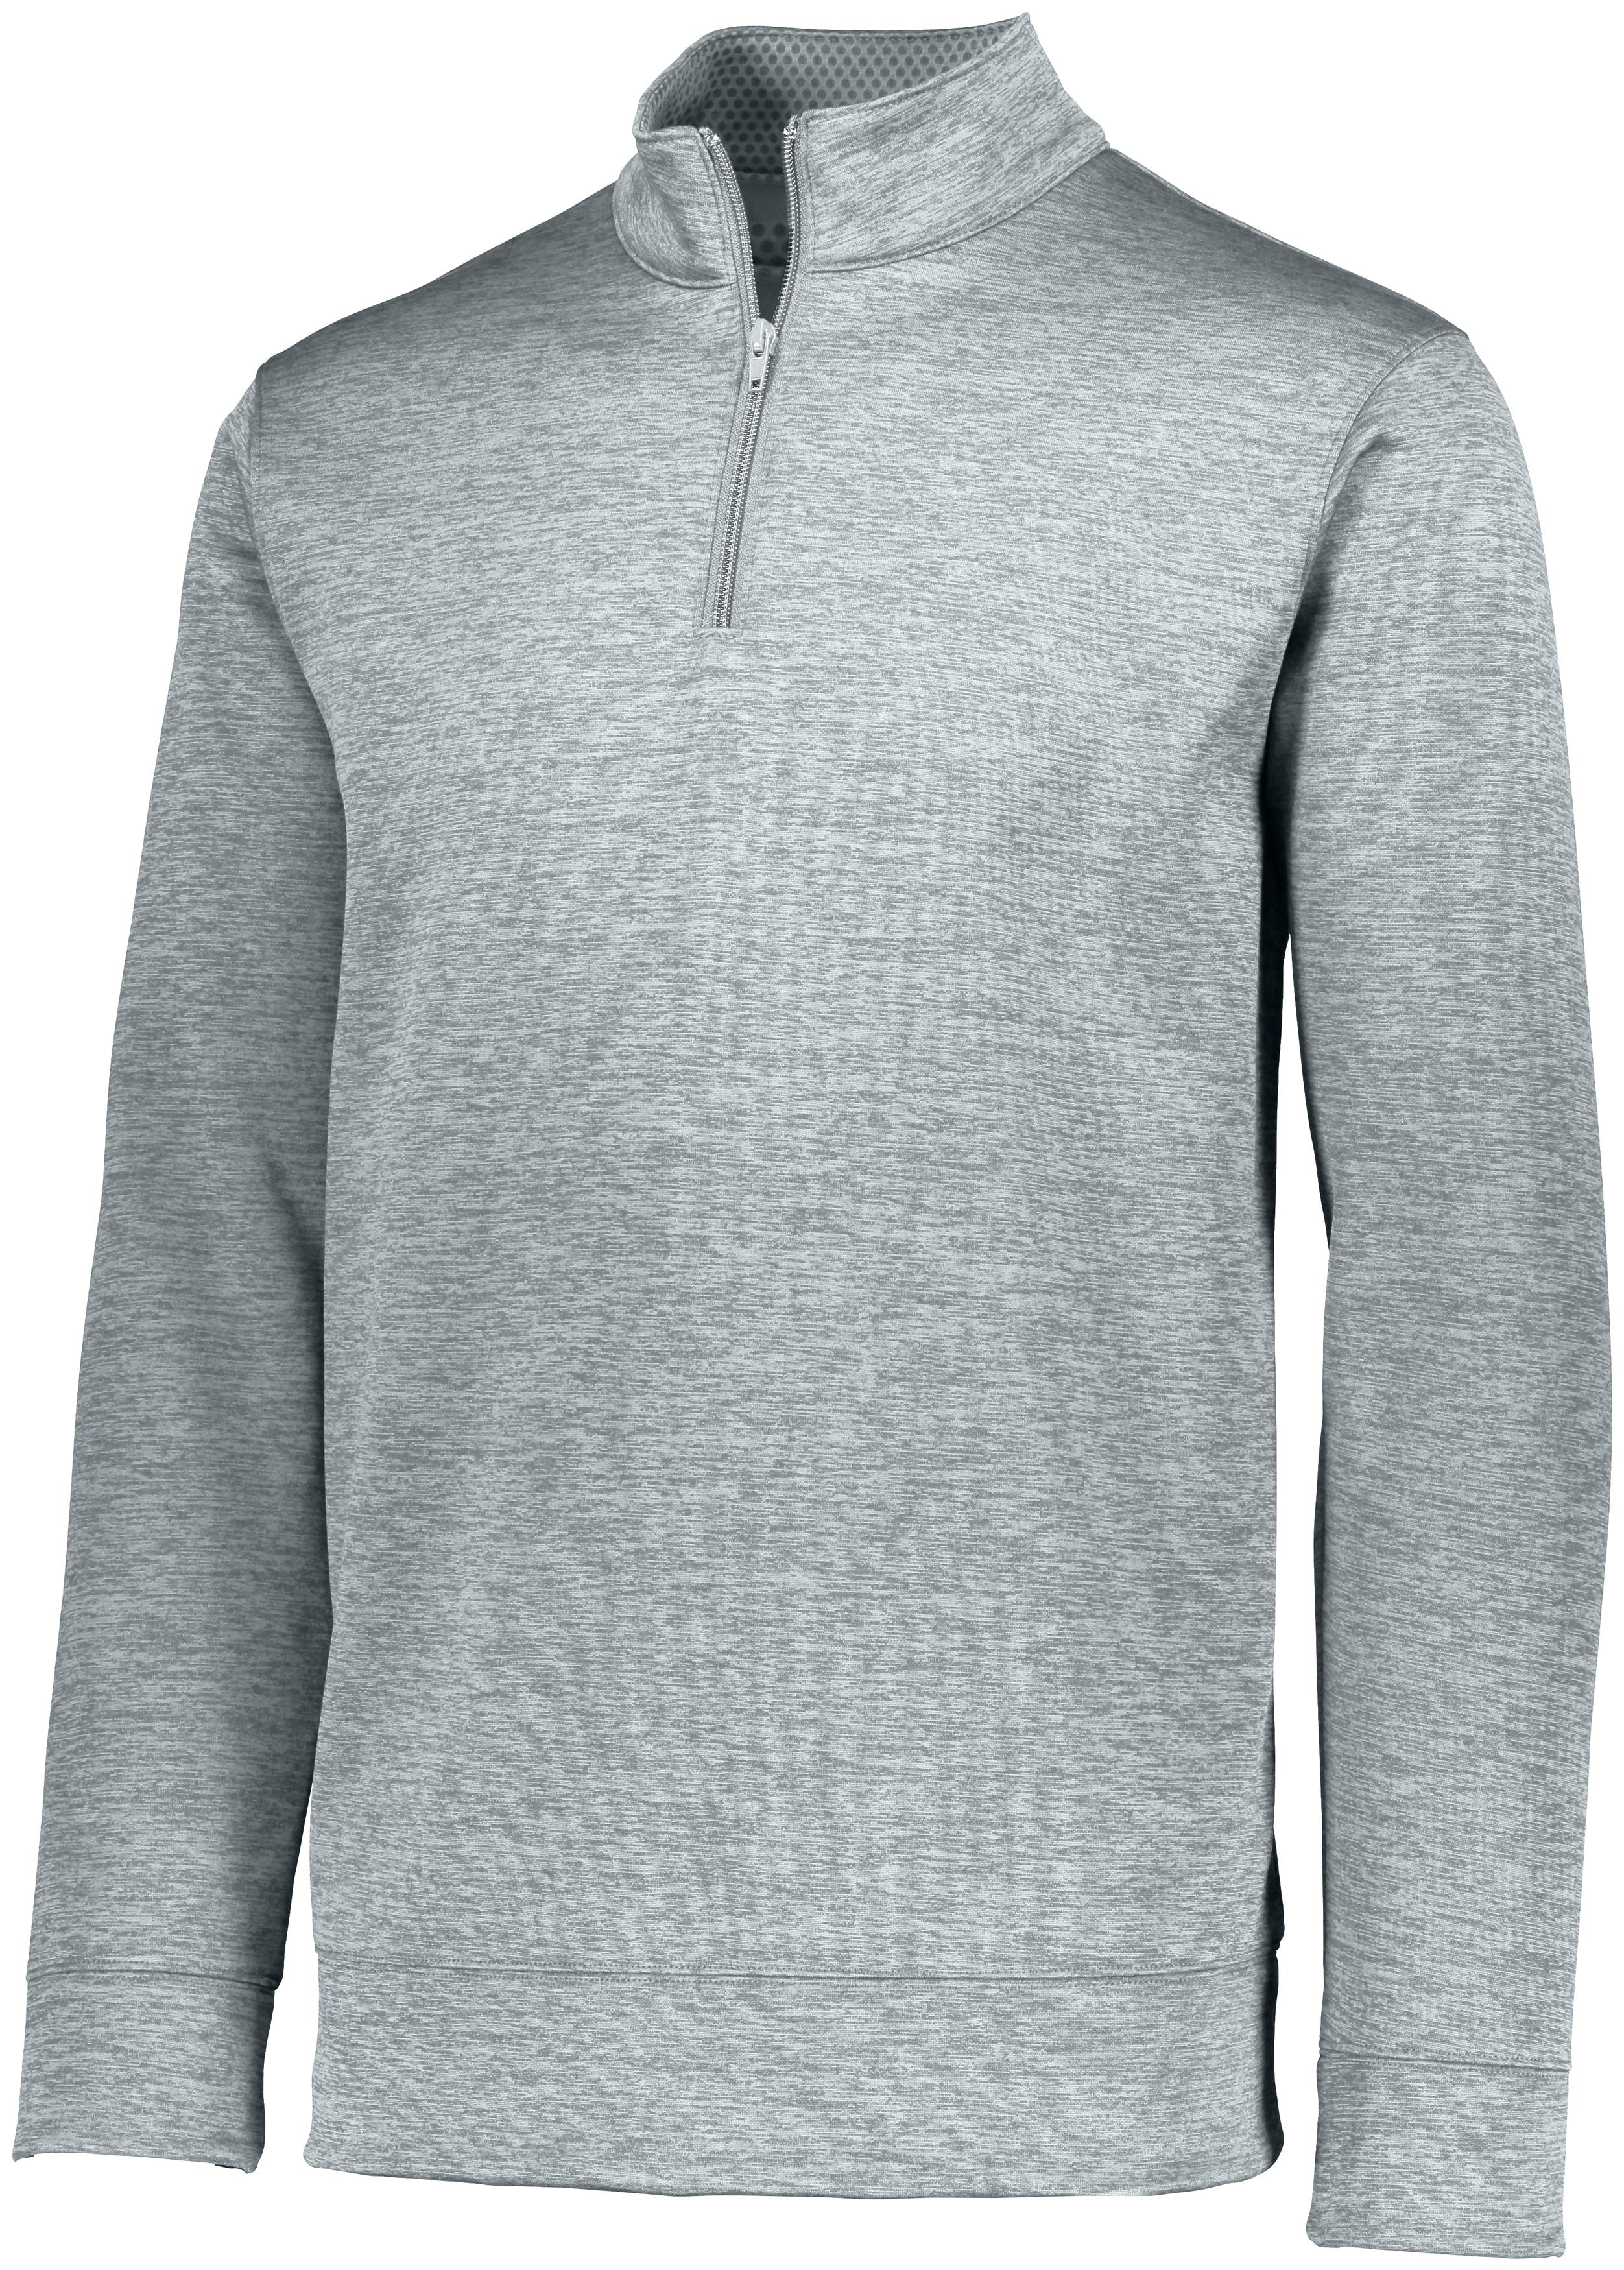 Augusta Sportswear Stoked Tonal Heather Pullover in Silver  -Part of the Adult, Adult-Pullover, Augusta-Products, Outerwear, Tonal-Fleece-Collection product lines at KanaleyCreations.com